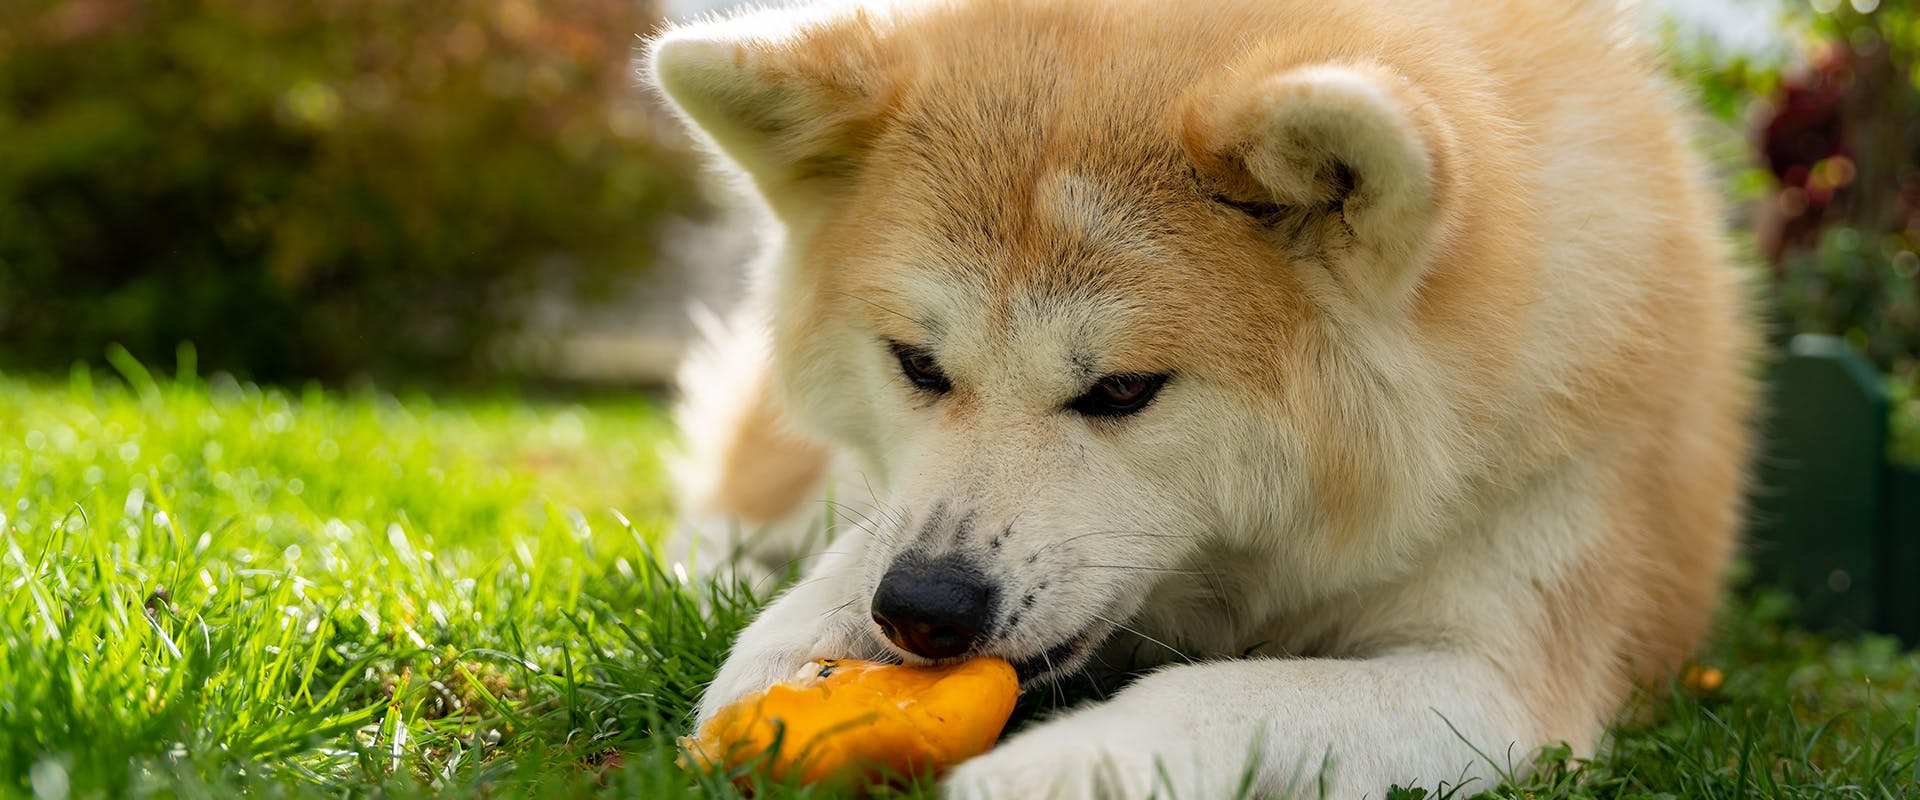 A Japanese Akita sitting on grass, playing with an orange chew toy